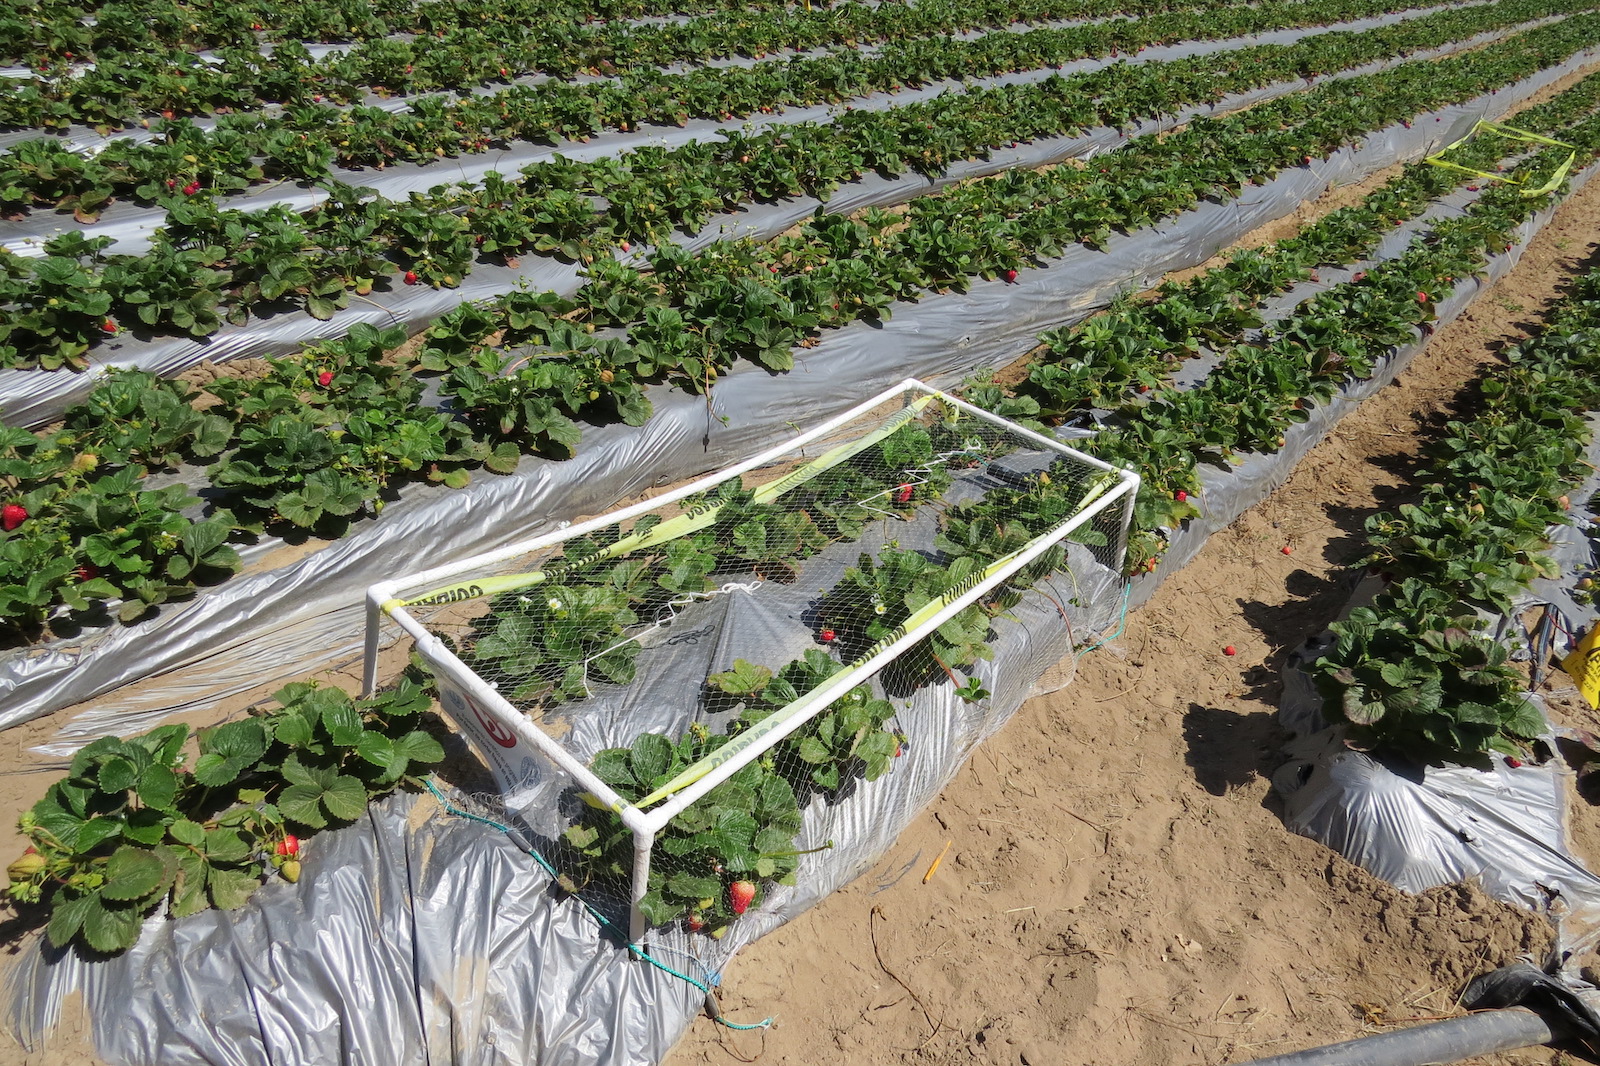 UC Davis researchers set up exclosure experiments on strawberry farms of varying habitats. They compared insect communities and berry damage between open areas and those inaccessible to wild birds. (Victoria Glynn)